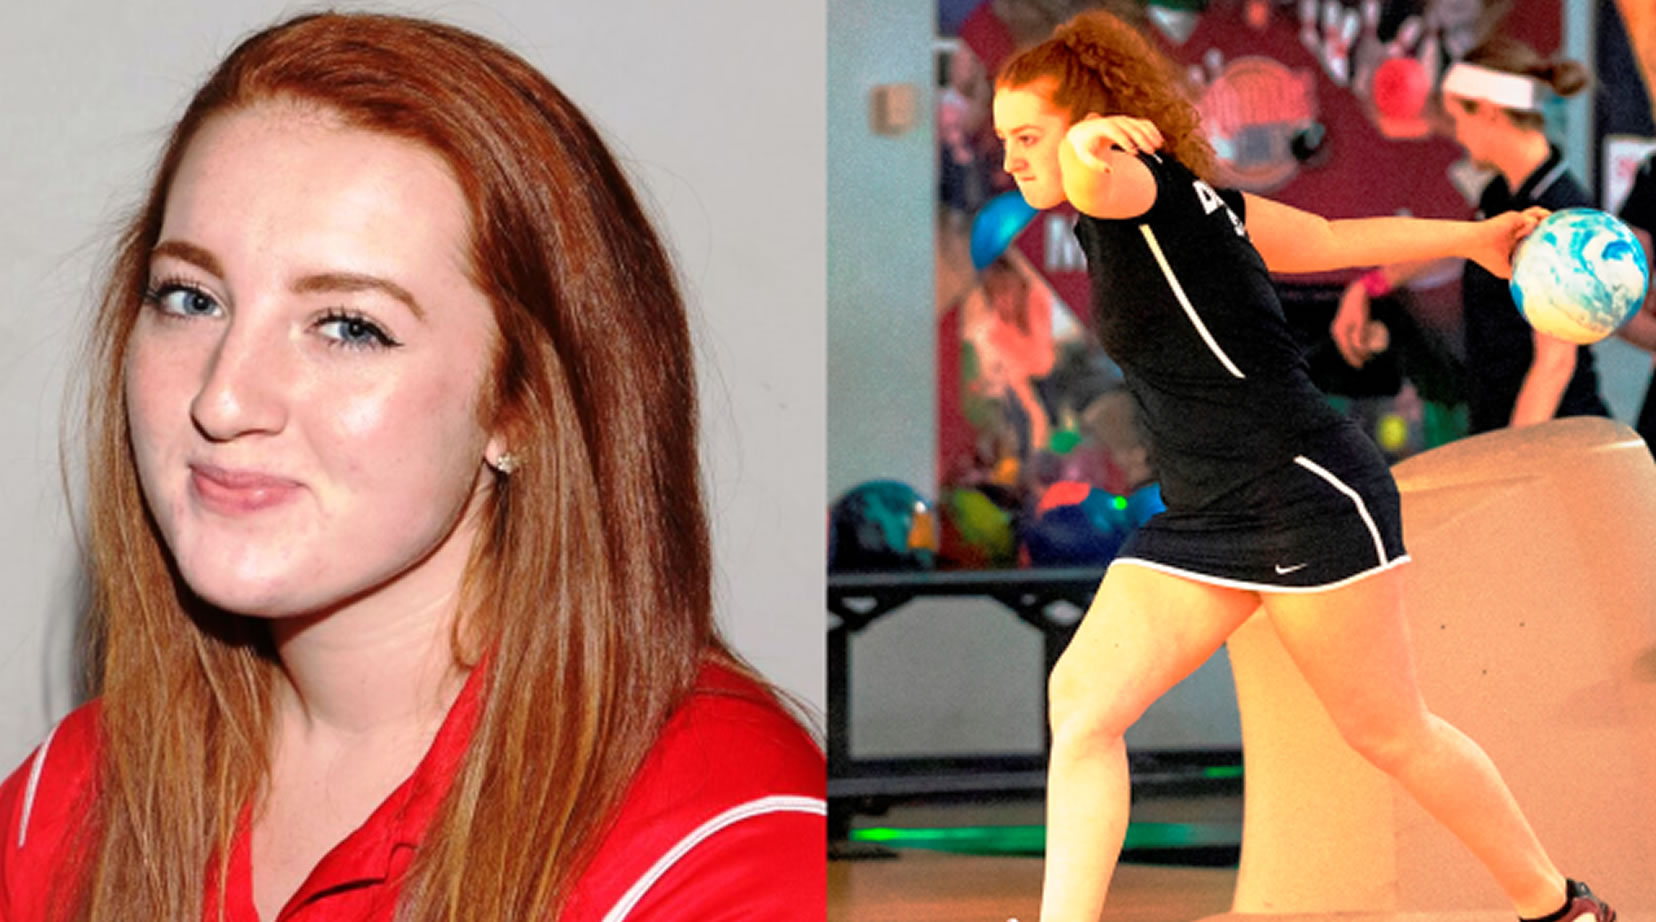 Delaware State sophomore bowler Alexis Neuer